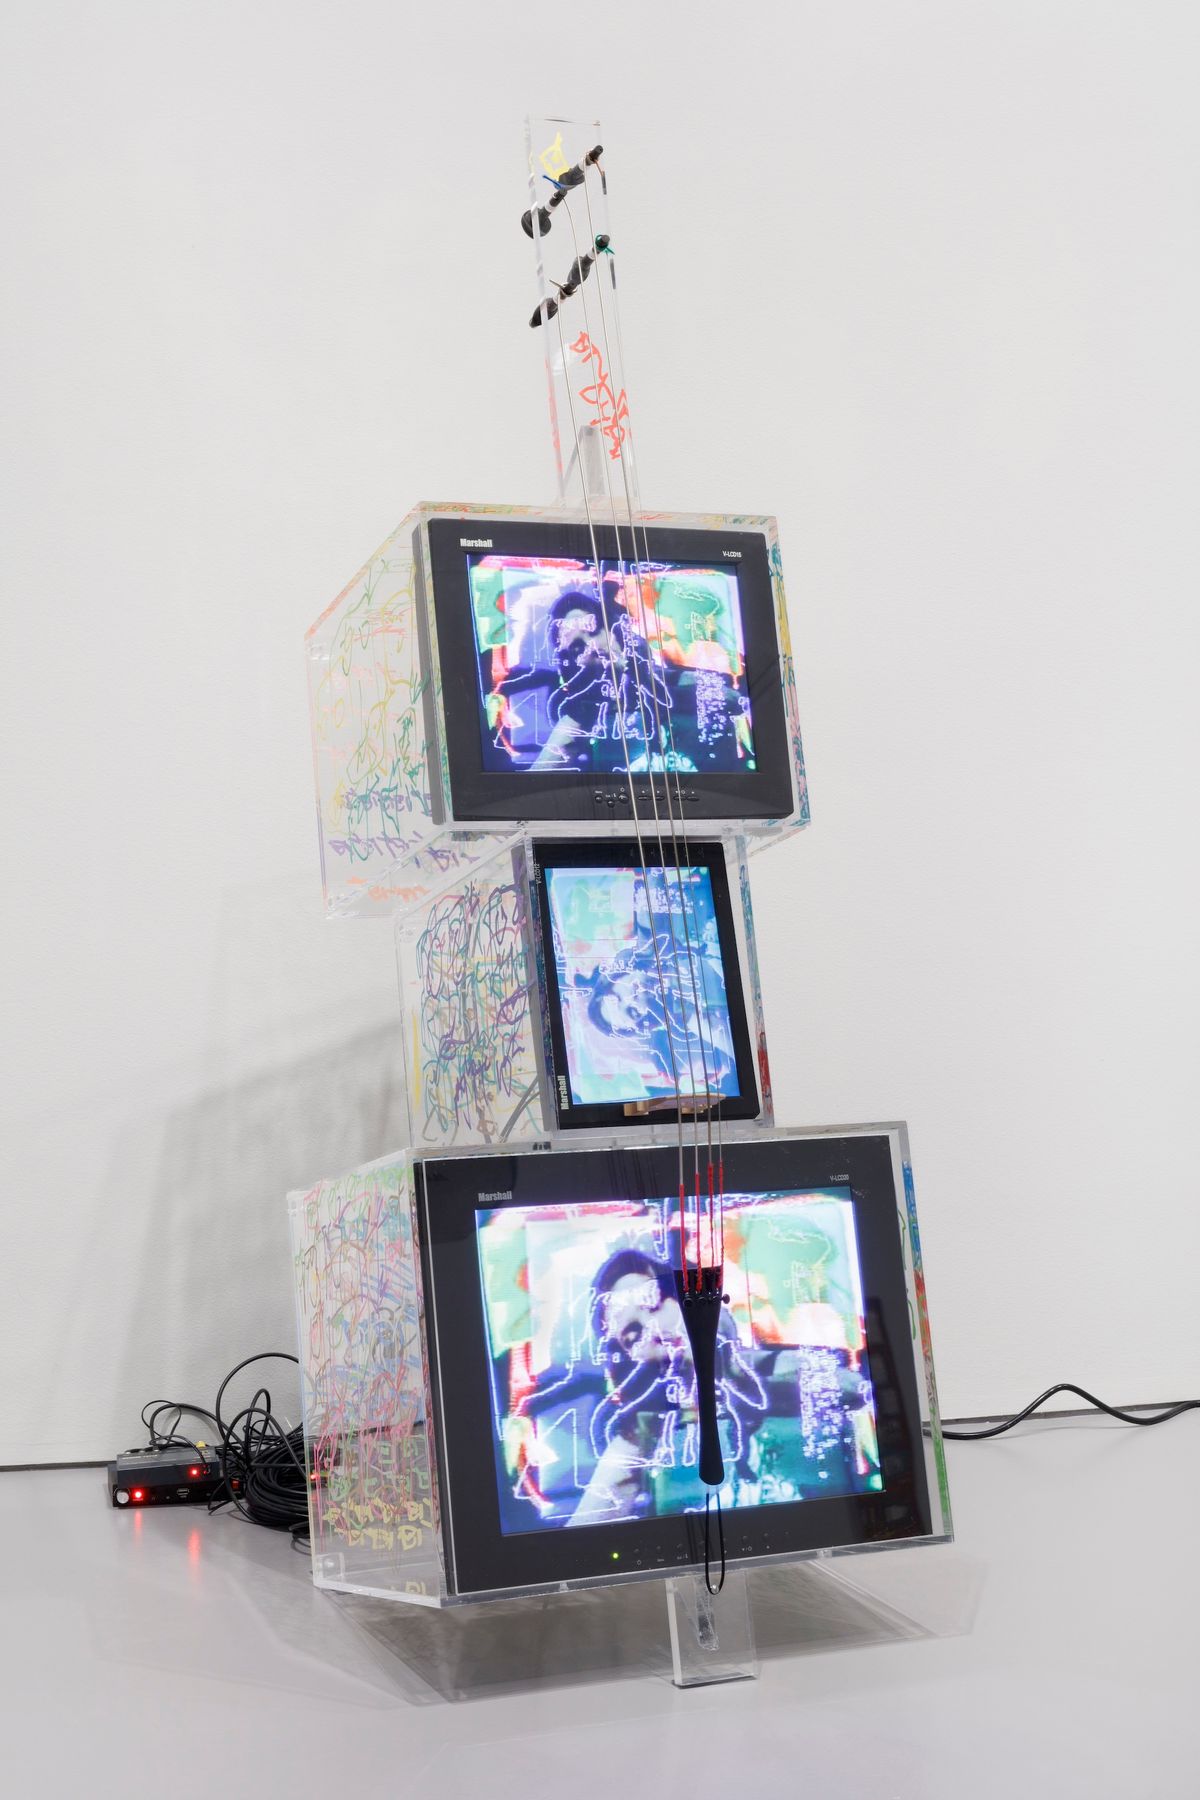 Nam June Paik, TV Cello, 2005. Gift of the Hakuta Family, 2023. Courtesy of the Hirshhorn Museum and Sculpture Garden. Photo: Rick Coulby.